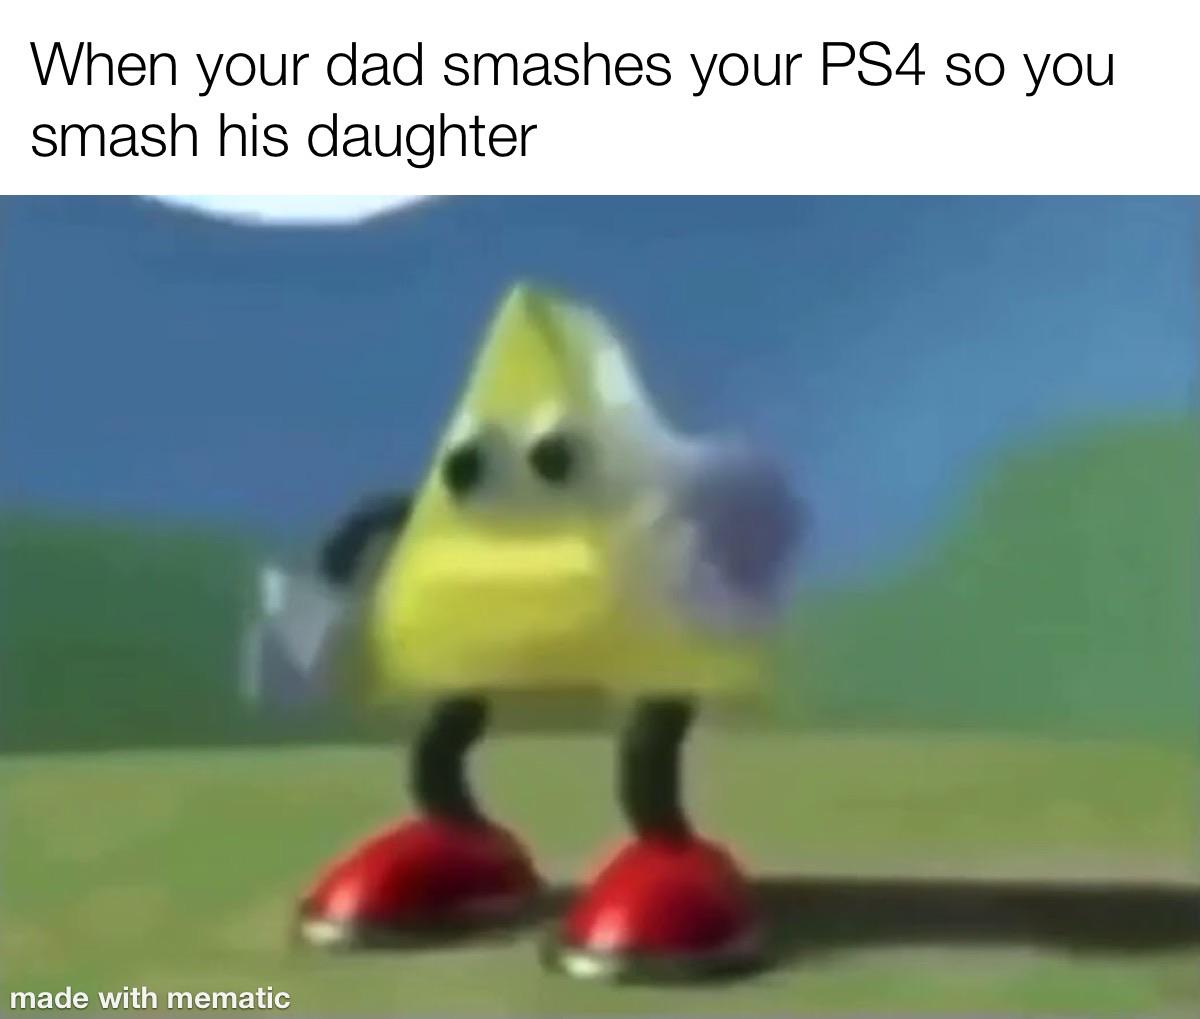 Hold up, Wheel, Spin, HolUp, TNkvvD, WtO3AHMBePY Dank Memes Hold up, Wheel, Spin, HolUp, TNkvvD, WtO3AHMBePY text: When your dad smashes your PS4 so you smash his daughter made with mematic 